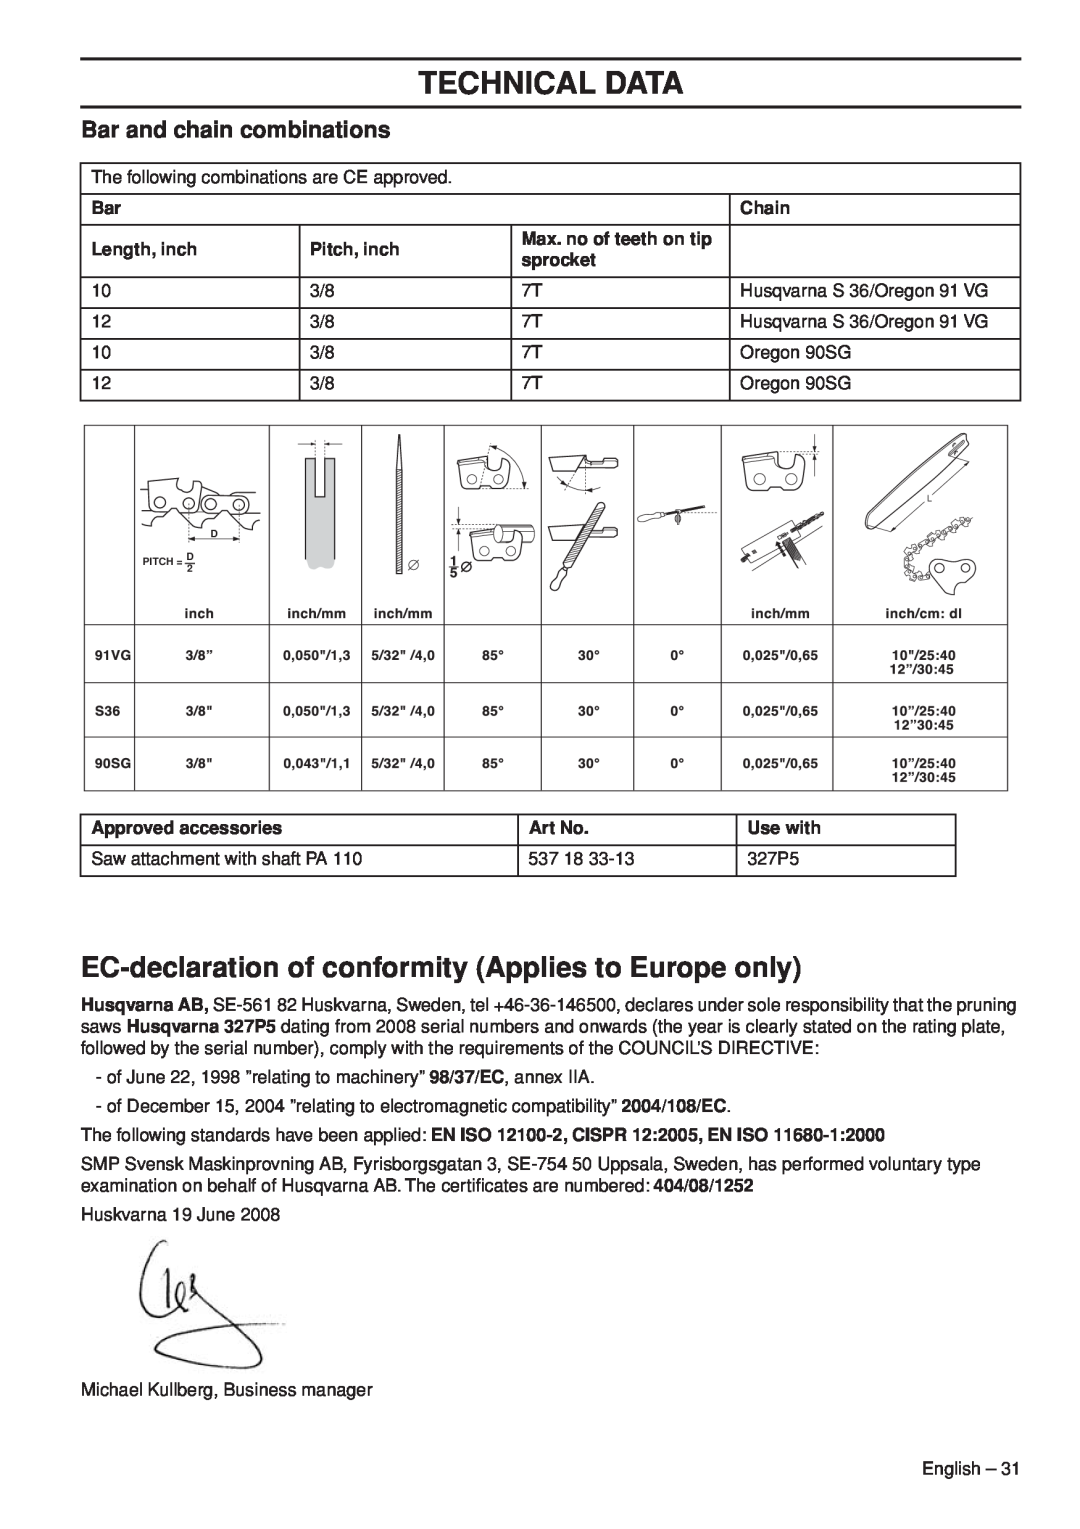 Husqvarna 966976701 EC-declaration of conformity Applies to Europe only, Bar and chain combinations, Chain, Length, inch 